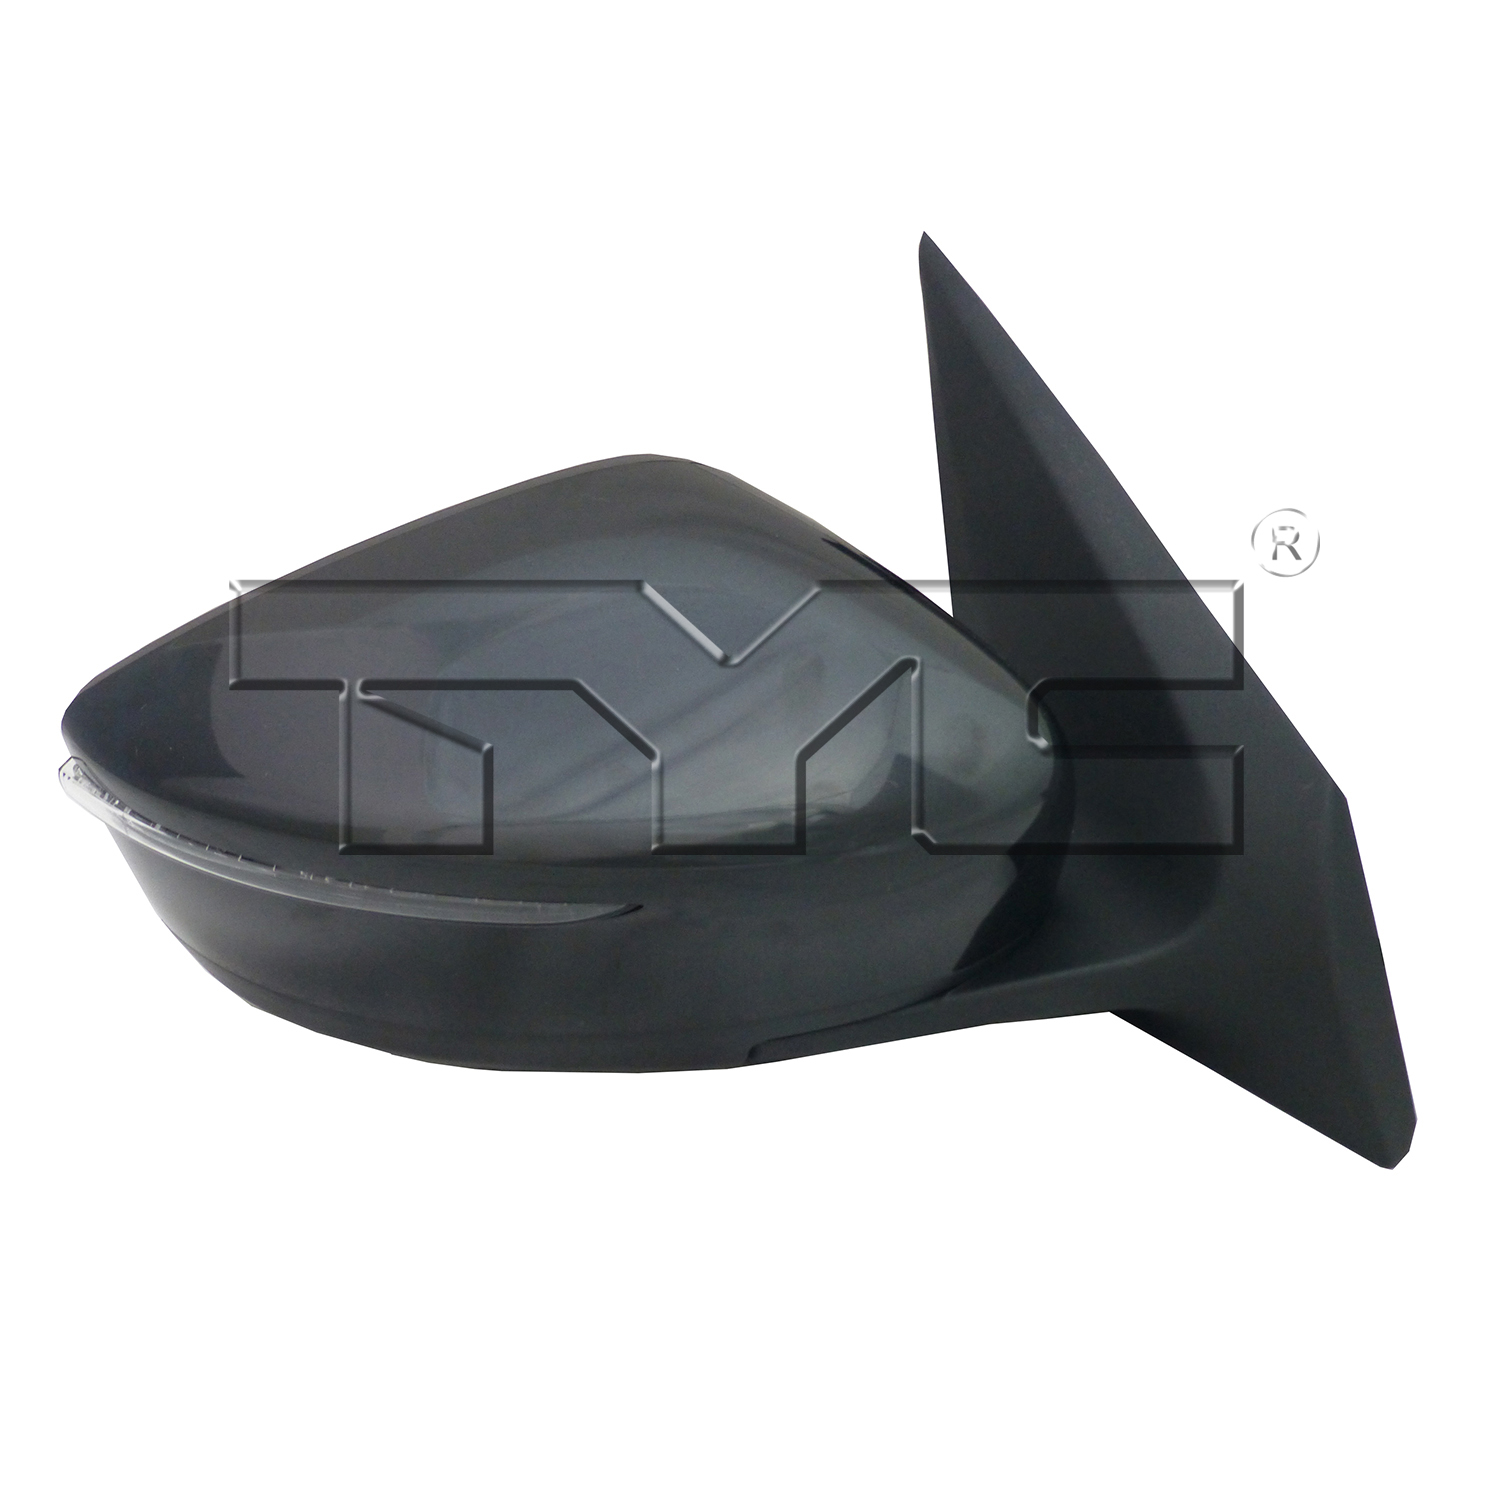 Aftermarket MIRRORS for NISSAN - VERSA, VERSA,15-17,RT Mirror outside rear view